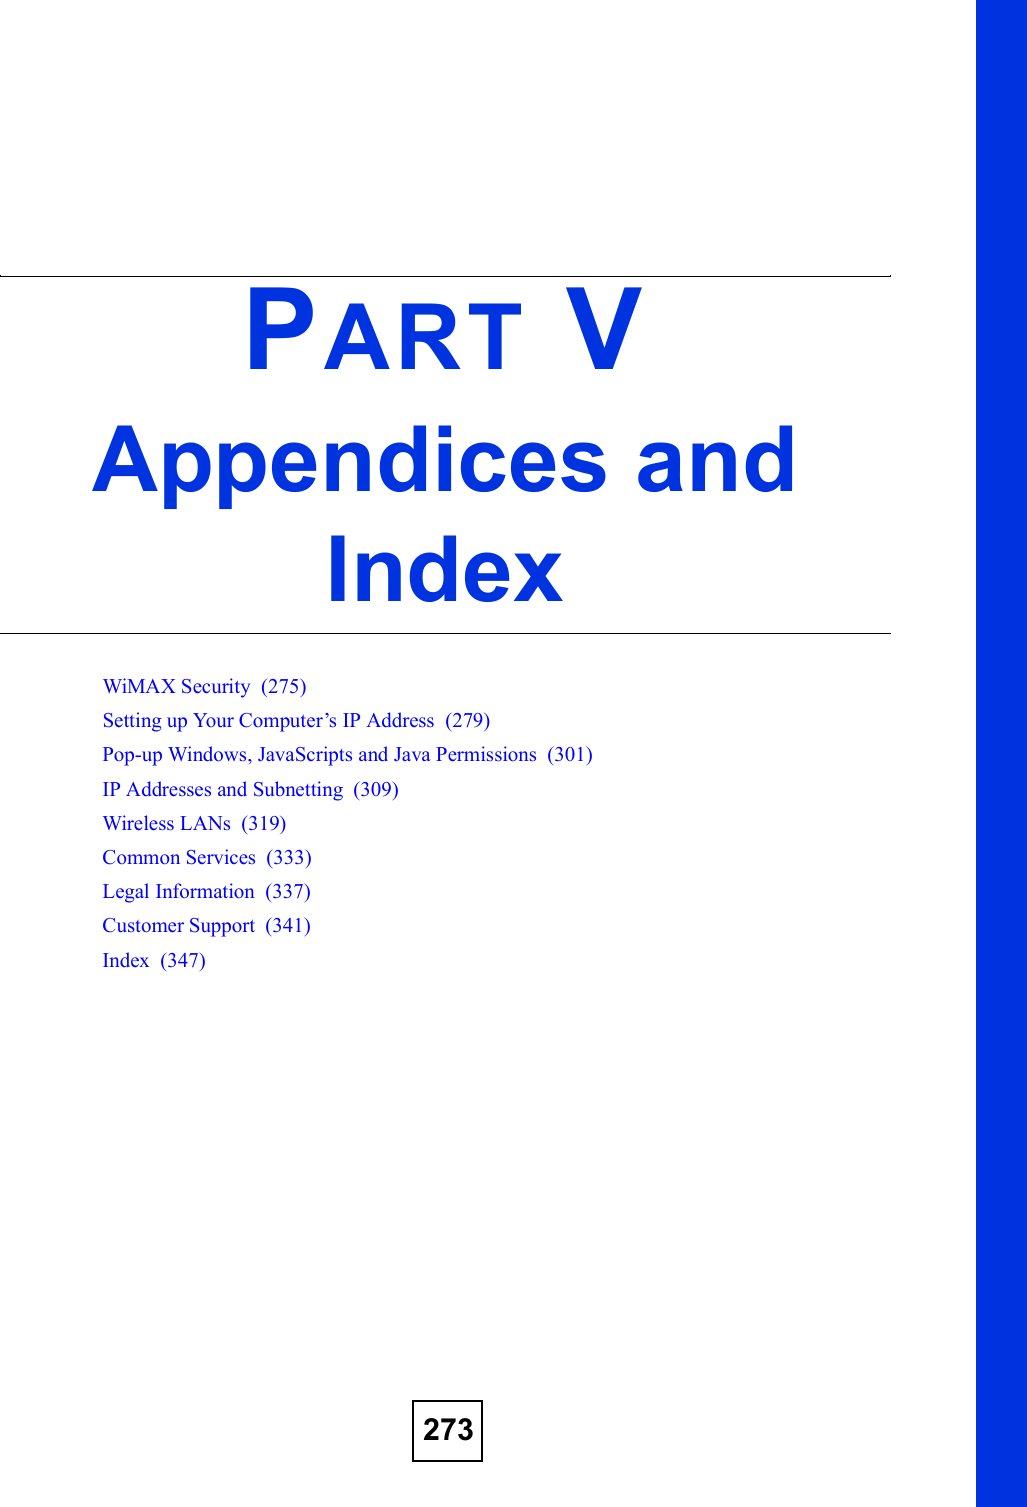 273PART VAppendices and IndexWiMAX Security  (275)Setting up Your Computer!s IP Address  (279)Pop-up Windows, JavaScripts and Java Permissions  (301)IP Addresses and Subnetting  (309)Wireless LANs  (319)Common Services  (333)Legal Information  (337)Customer Support  (341)Index  (347)